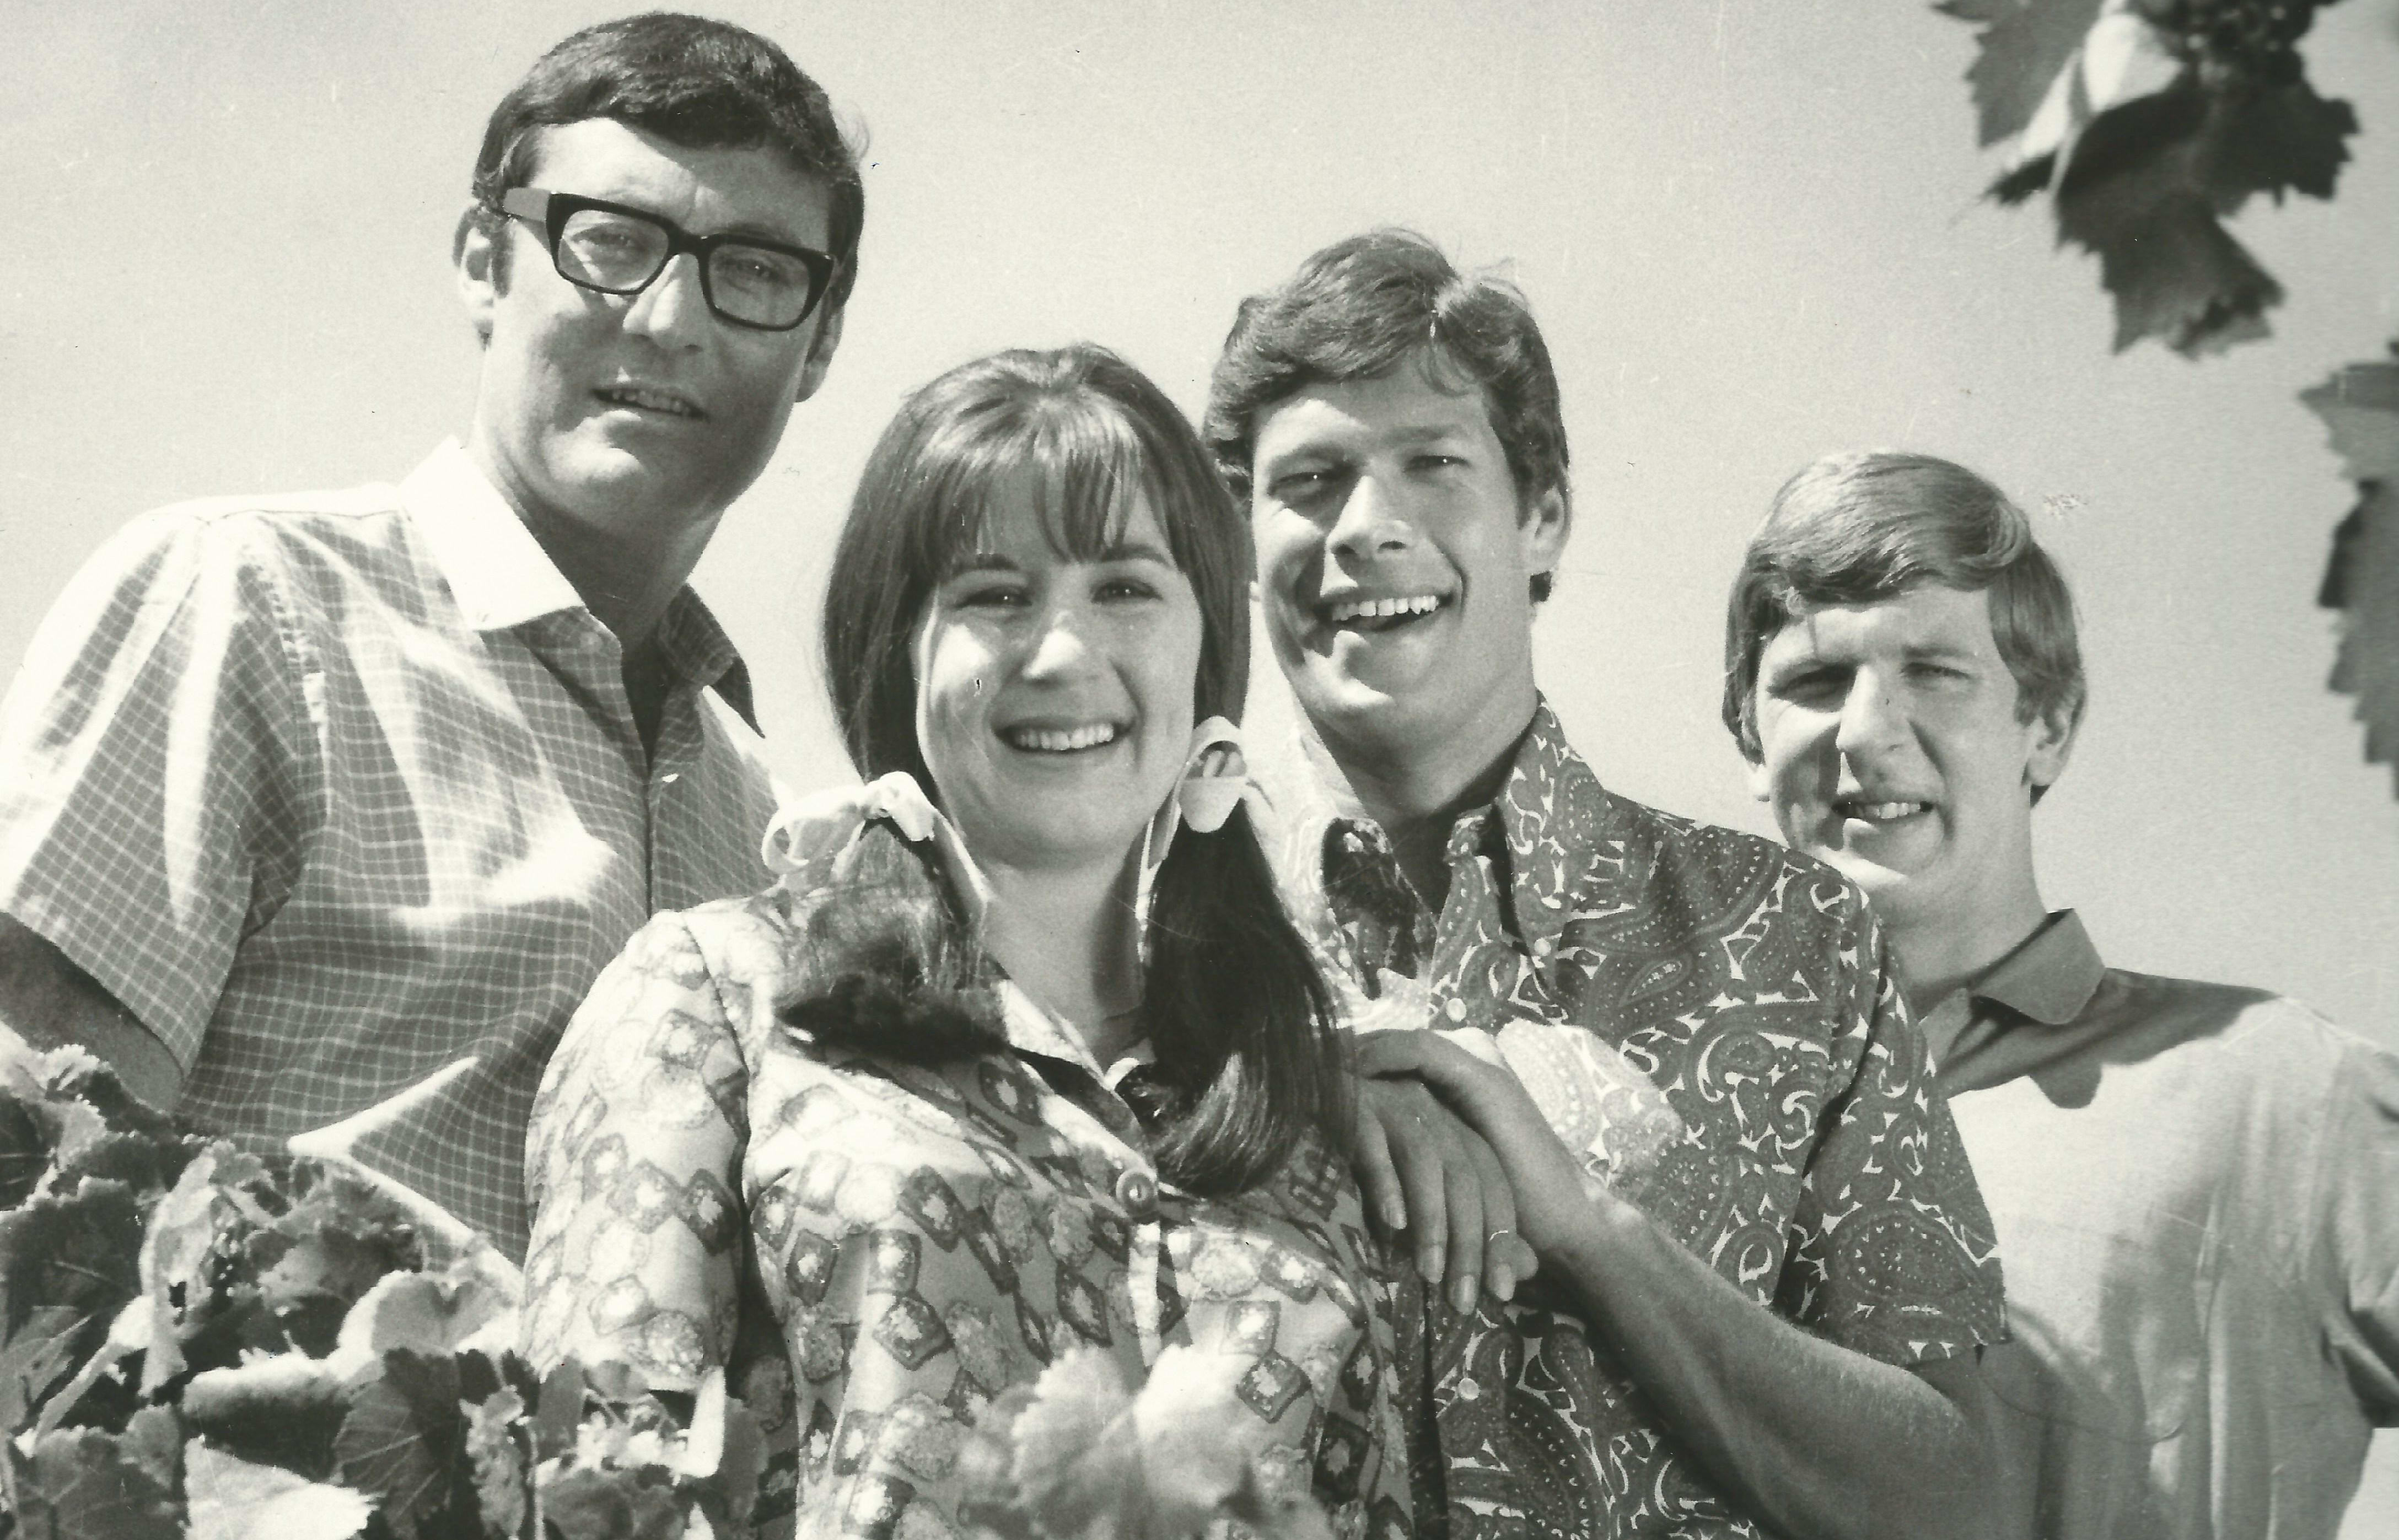 The Seekers - Athol Guy, Judith Durham, Keith Potger and Bruce Woodley.